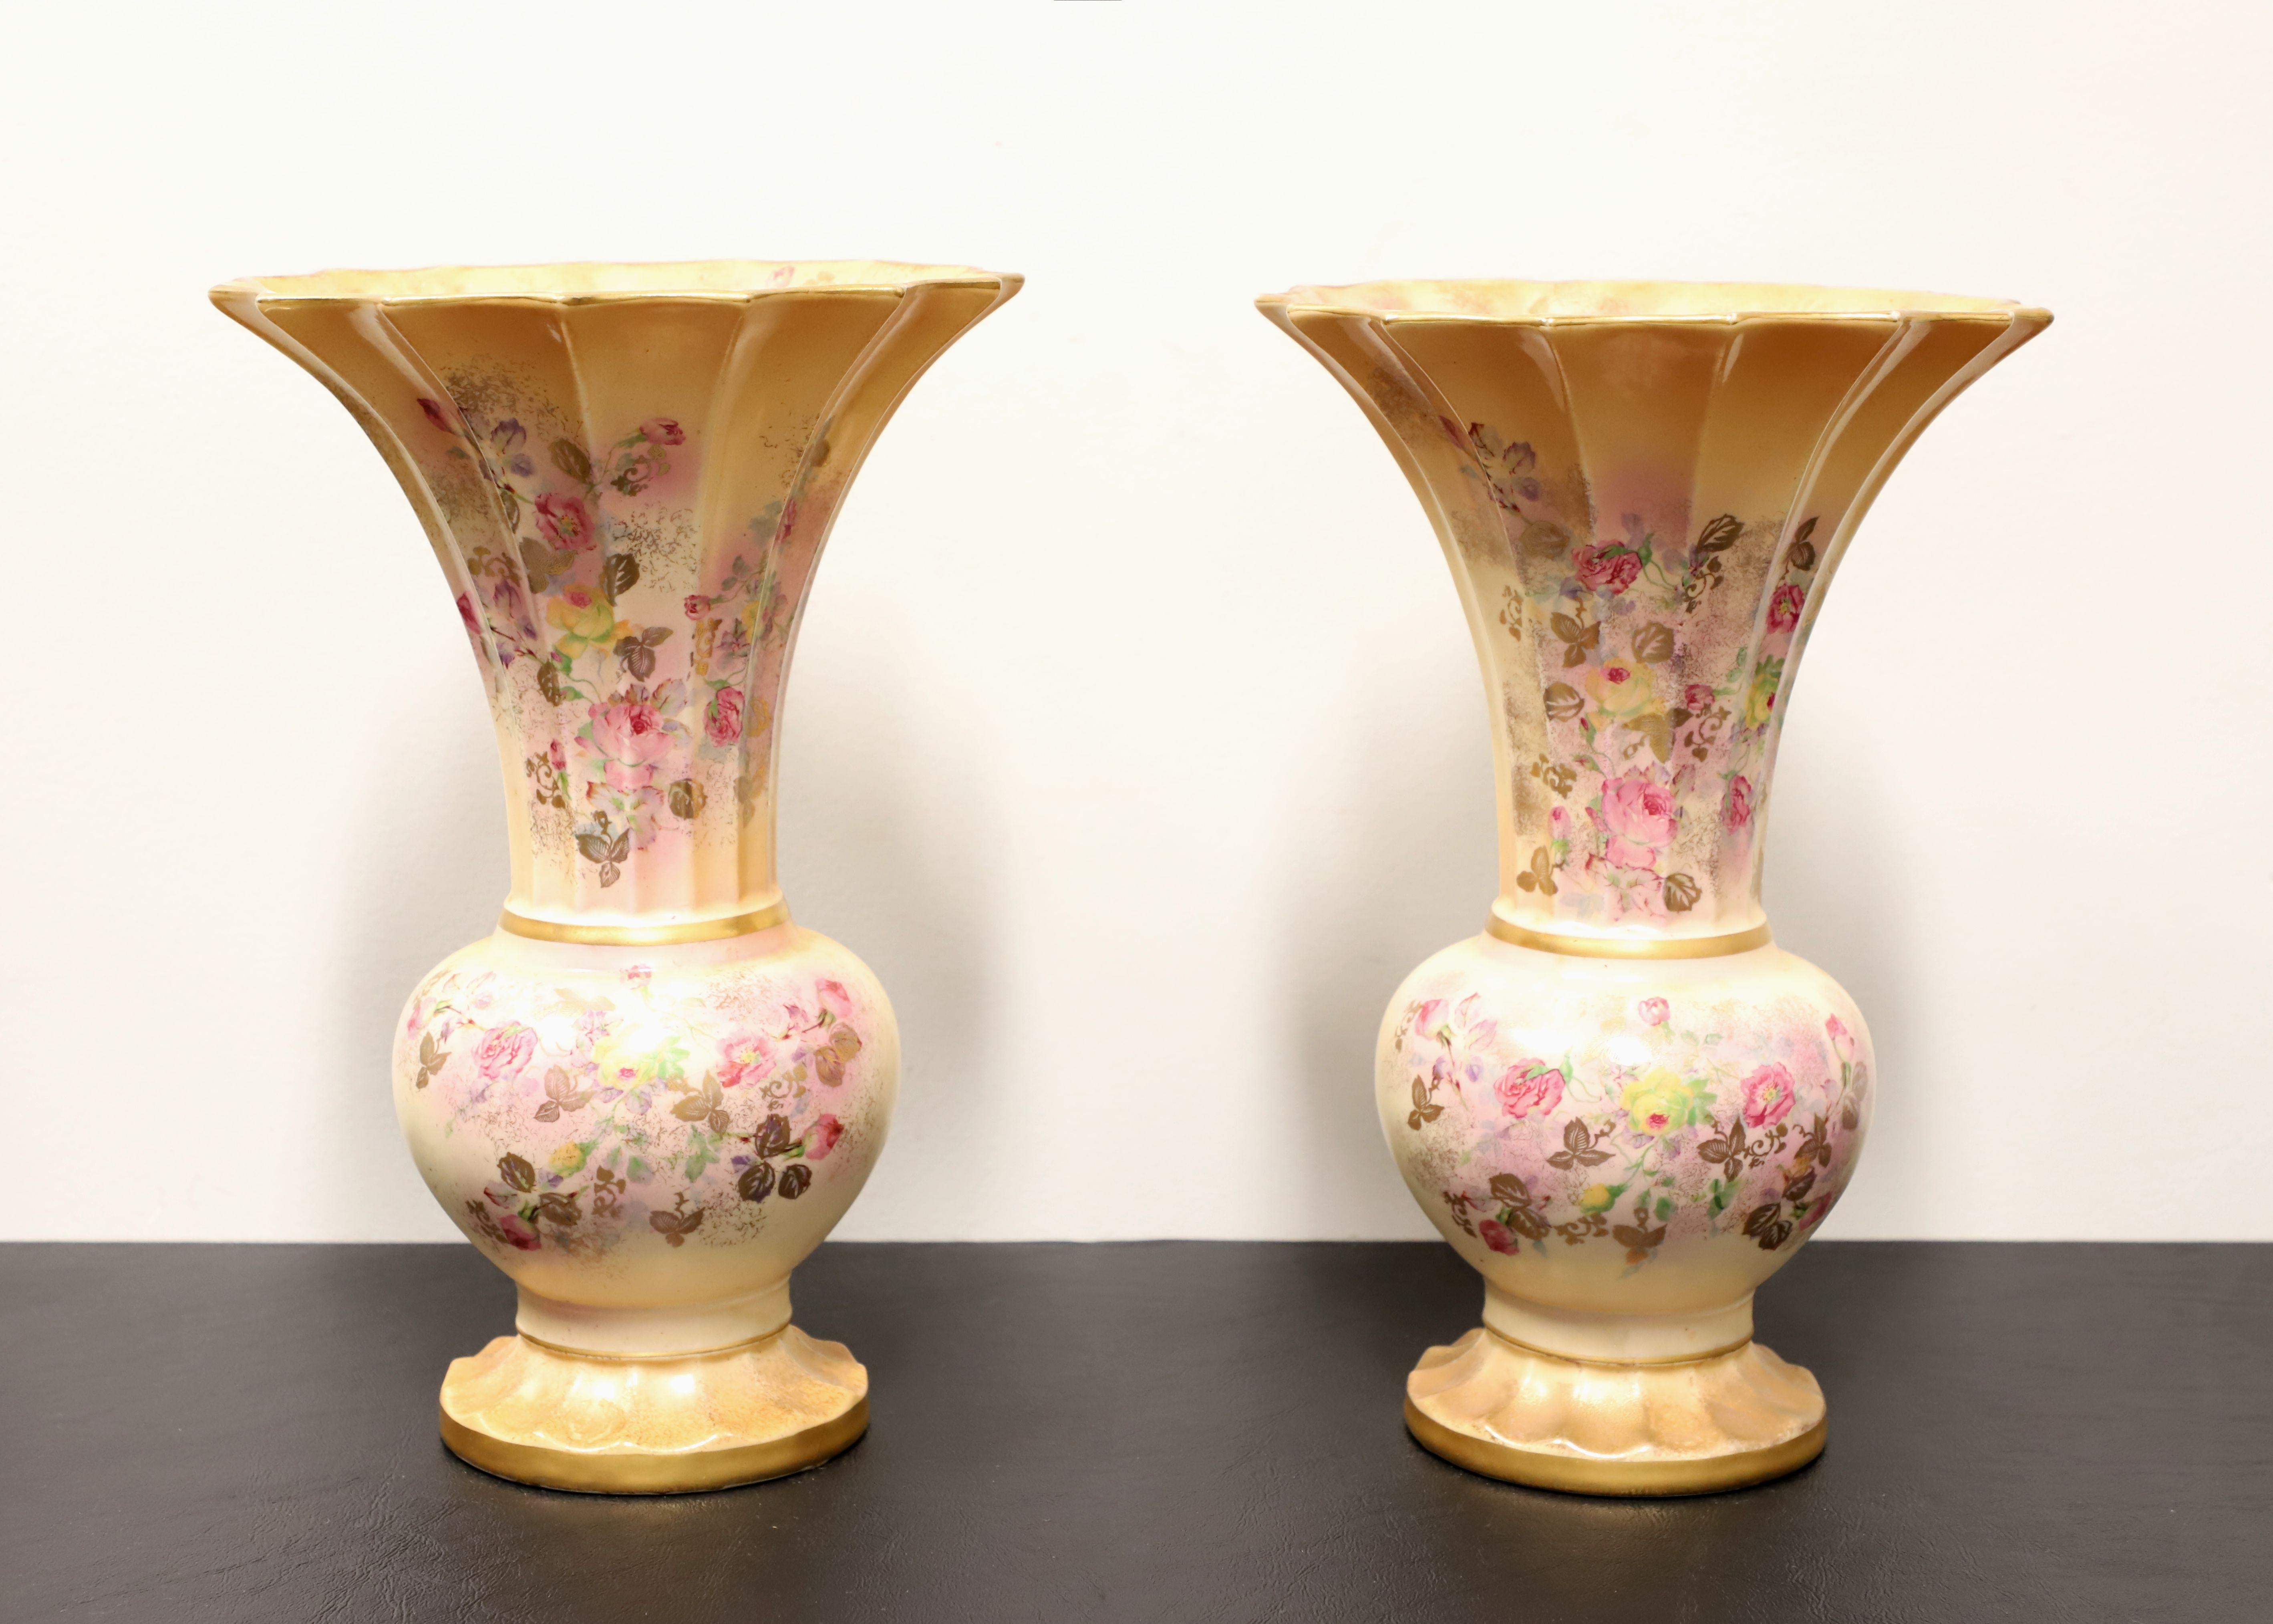 BECKWITH CHINA Hand Painted Porcelain Vases - Pair For Sale 4